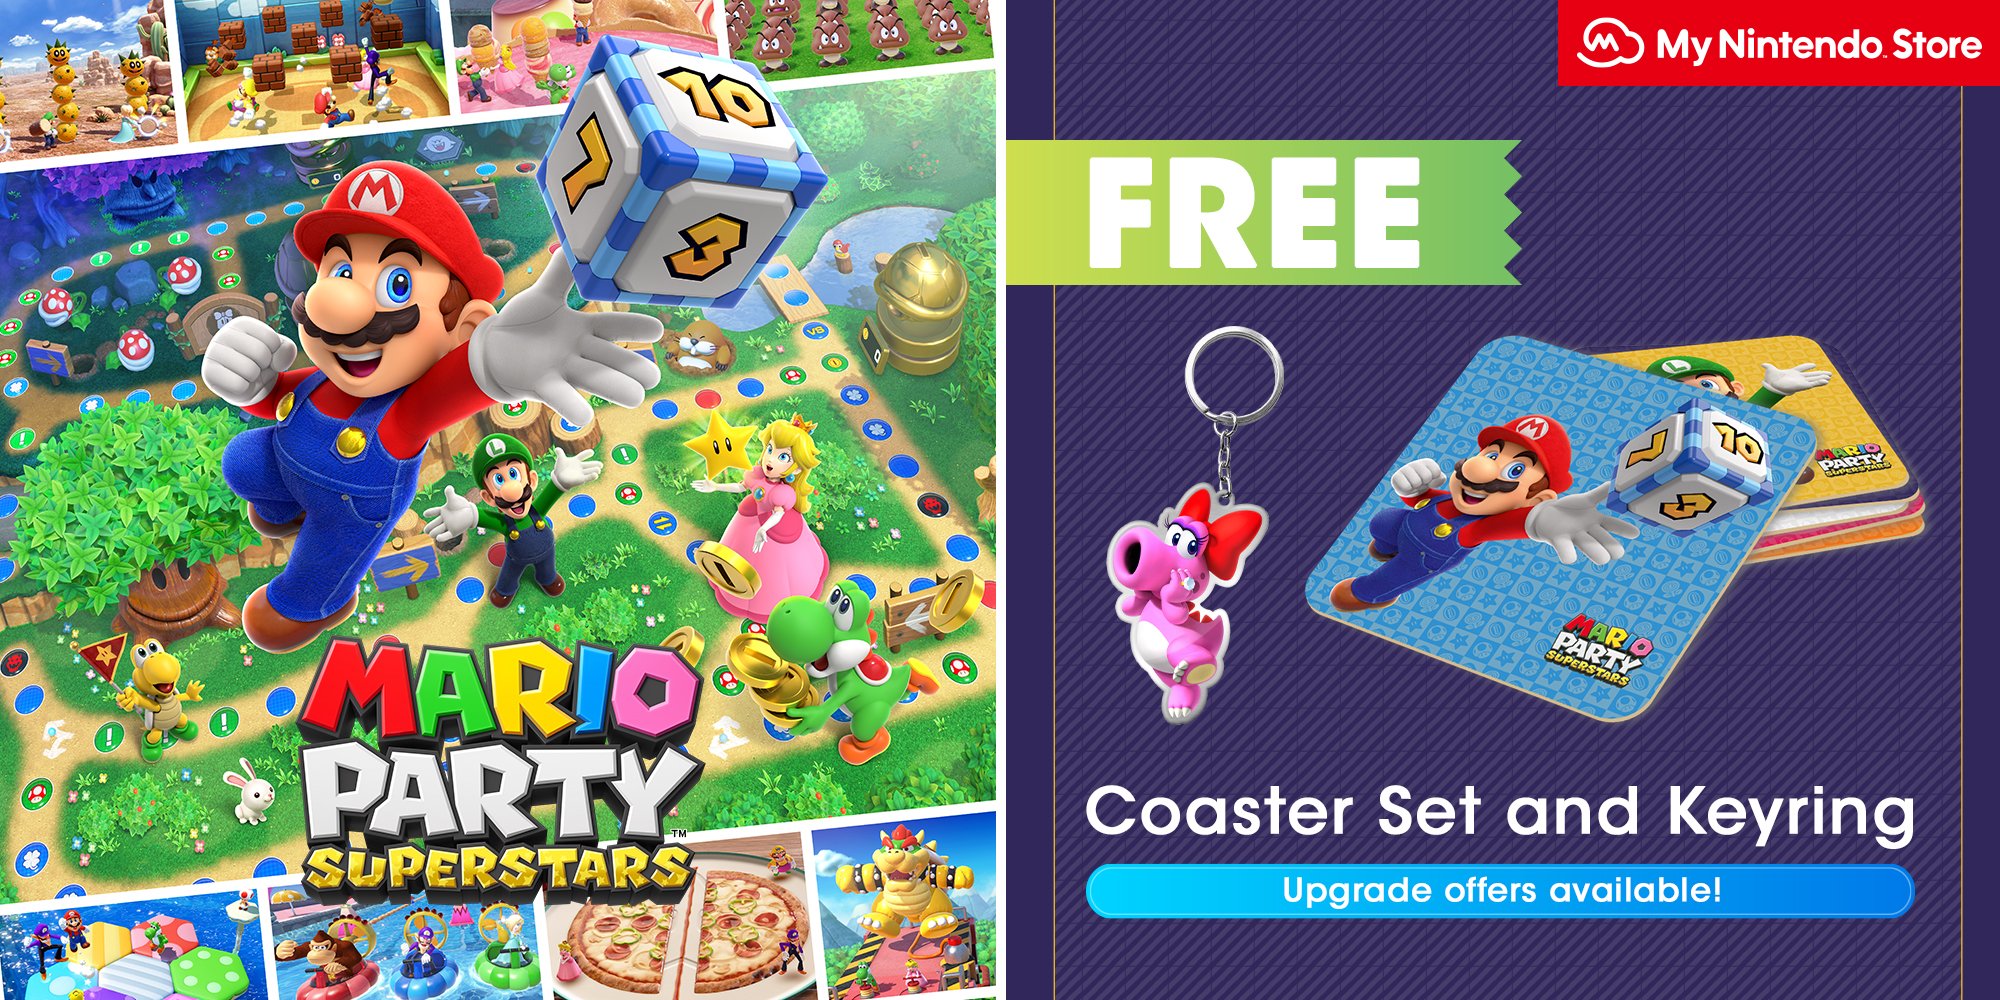 Nintendo Uk Mario Party Superstars Launches On Nintendo Switch On October 29th Pre Order Now On My Nintendo Store And Receive A Free Coaster Set And Birdo Keyring Already Pre Ordered You